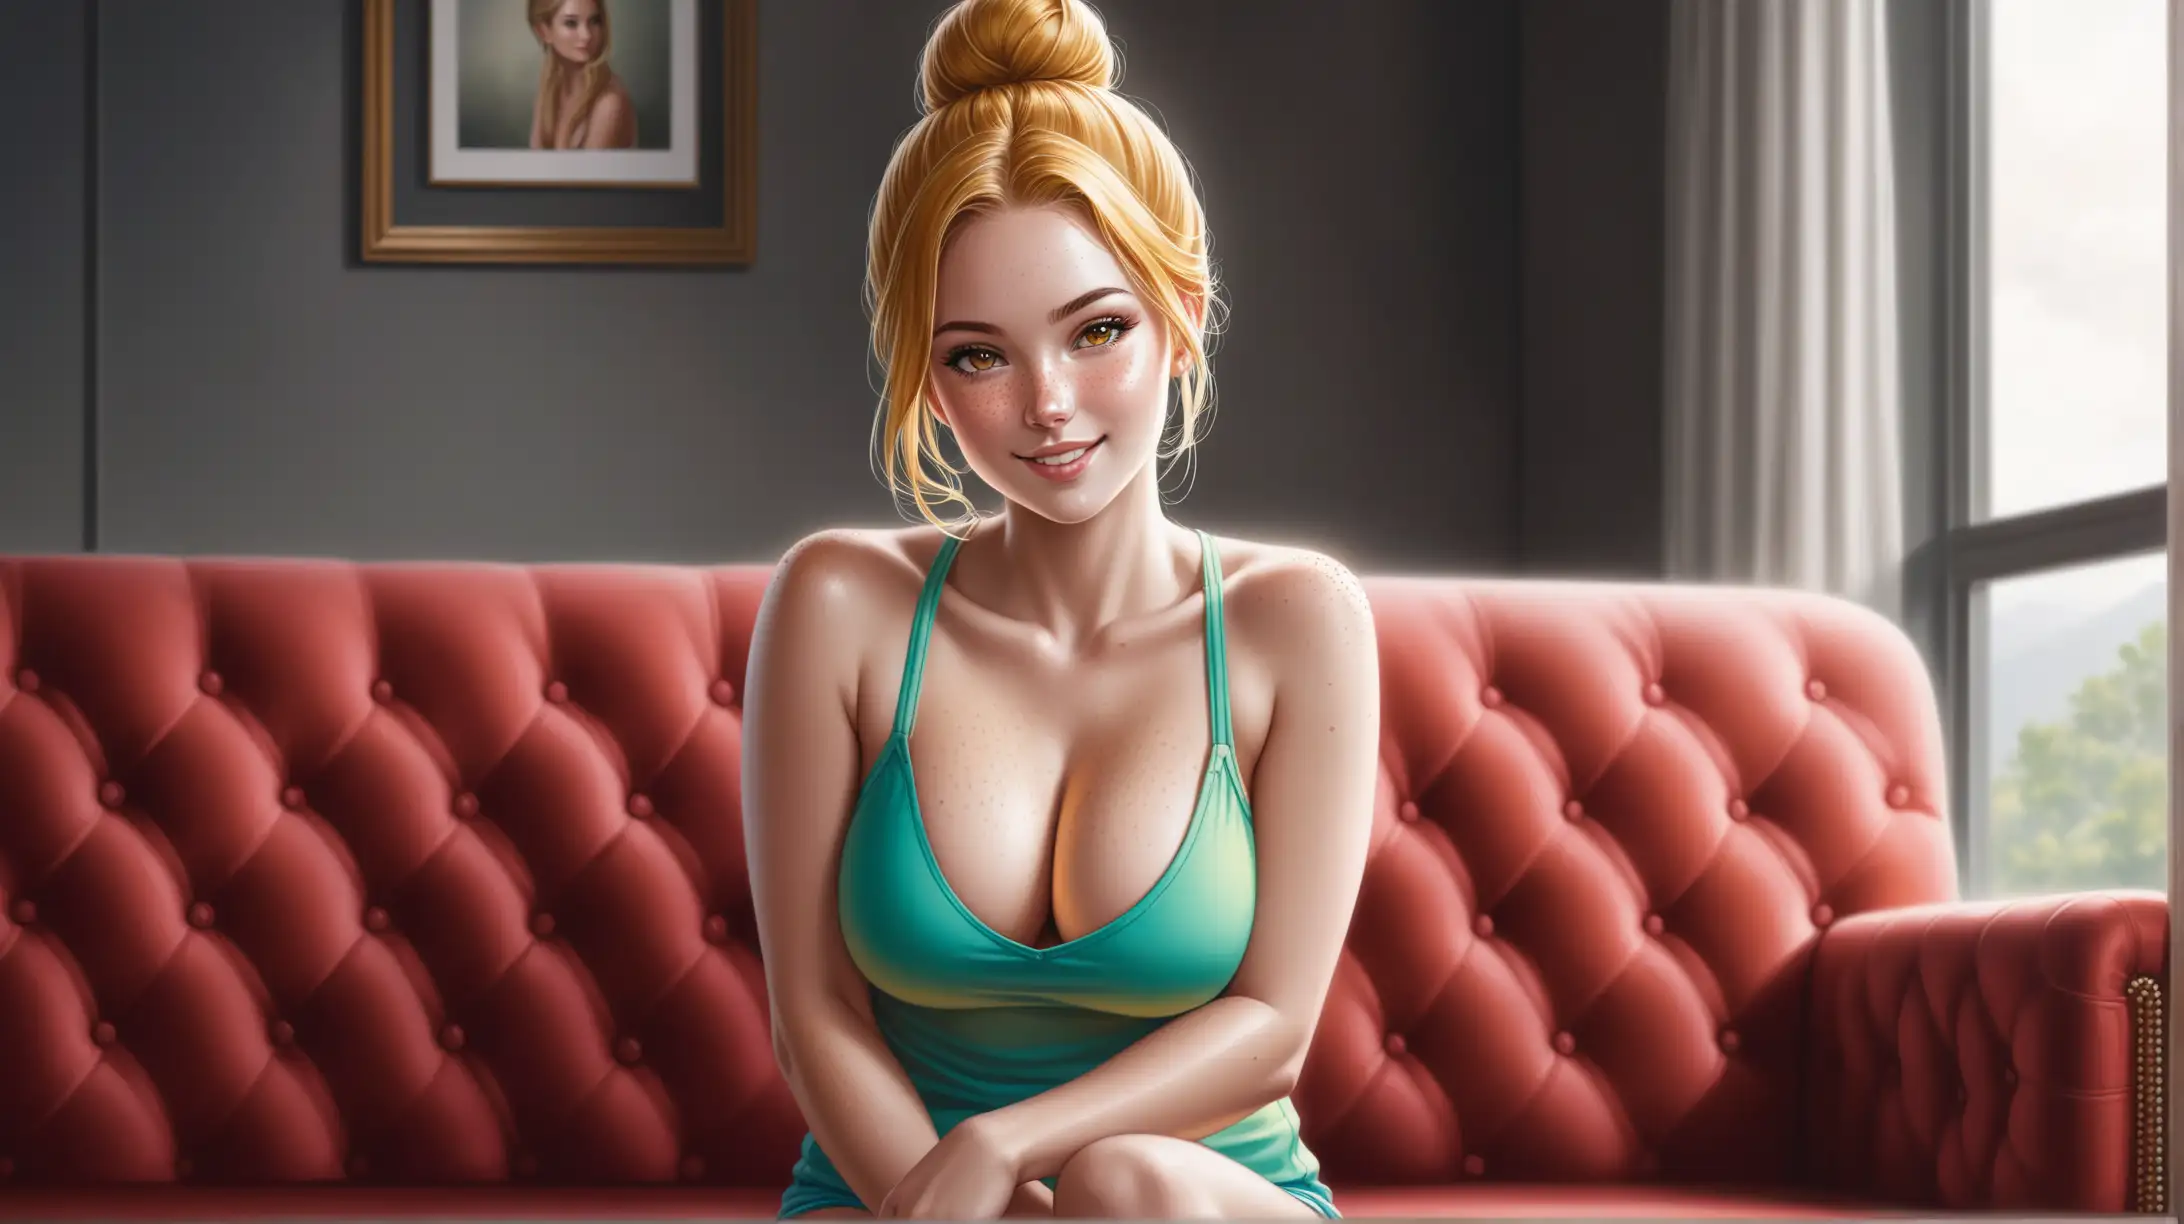 Draw a woman, long blonde hair in a bun, gold eyes, freckles, perky body, high quality, realistic, long shot, indoors, sofa, sitting, overcast lighting, colorful casual outfit, seductive, cleavage, smiling toward the viewer